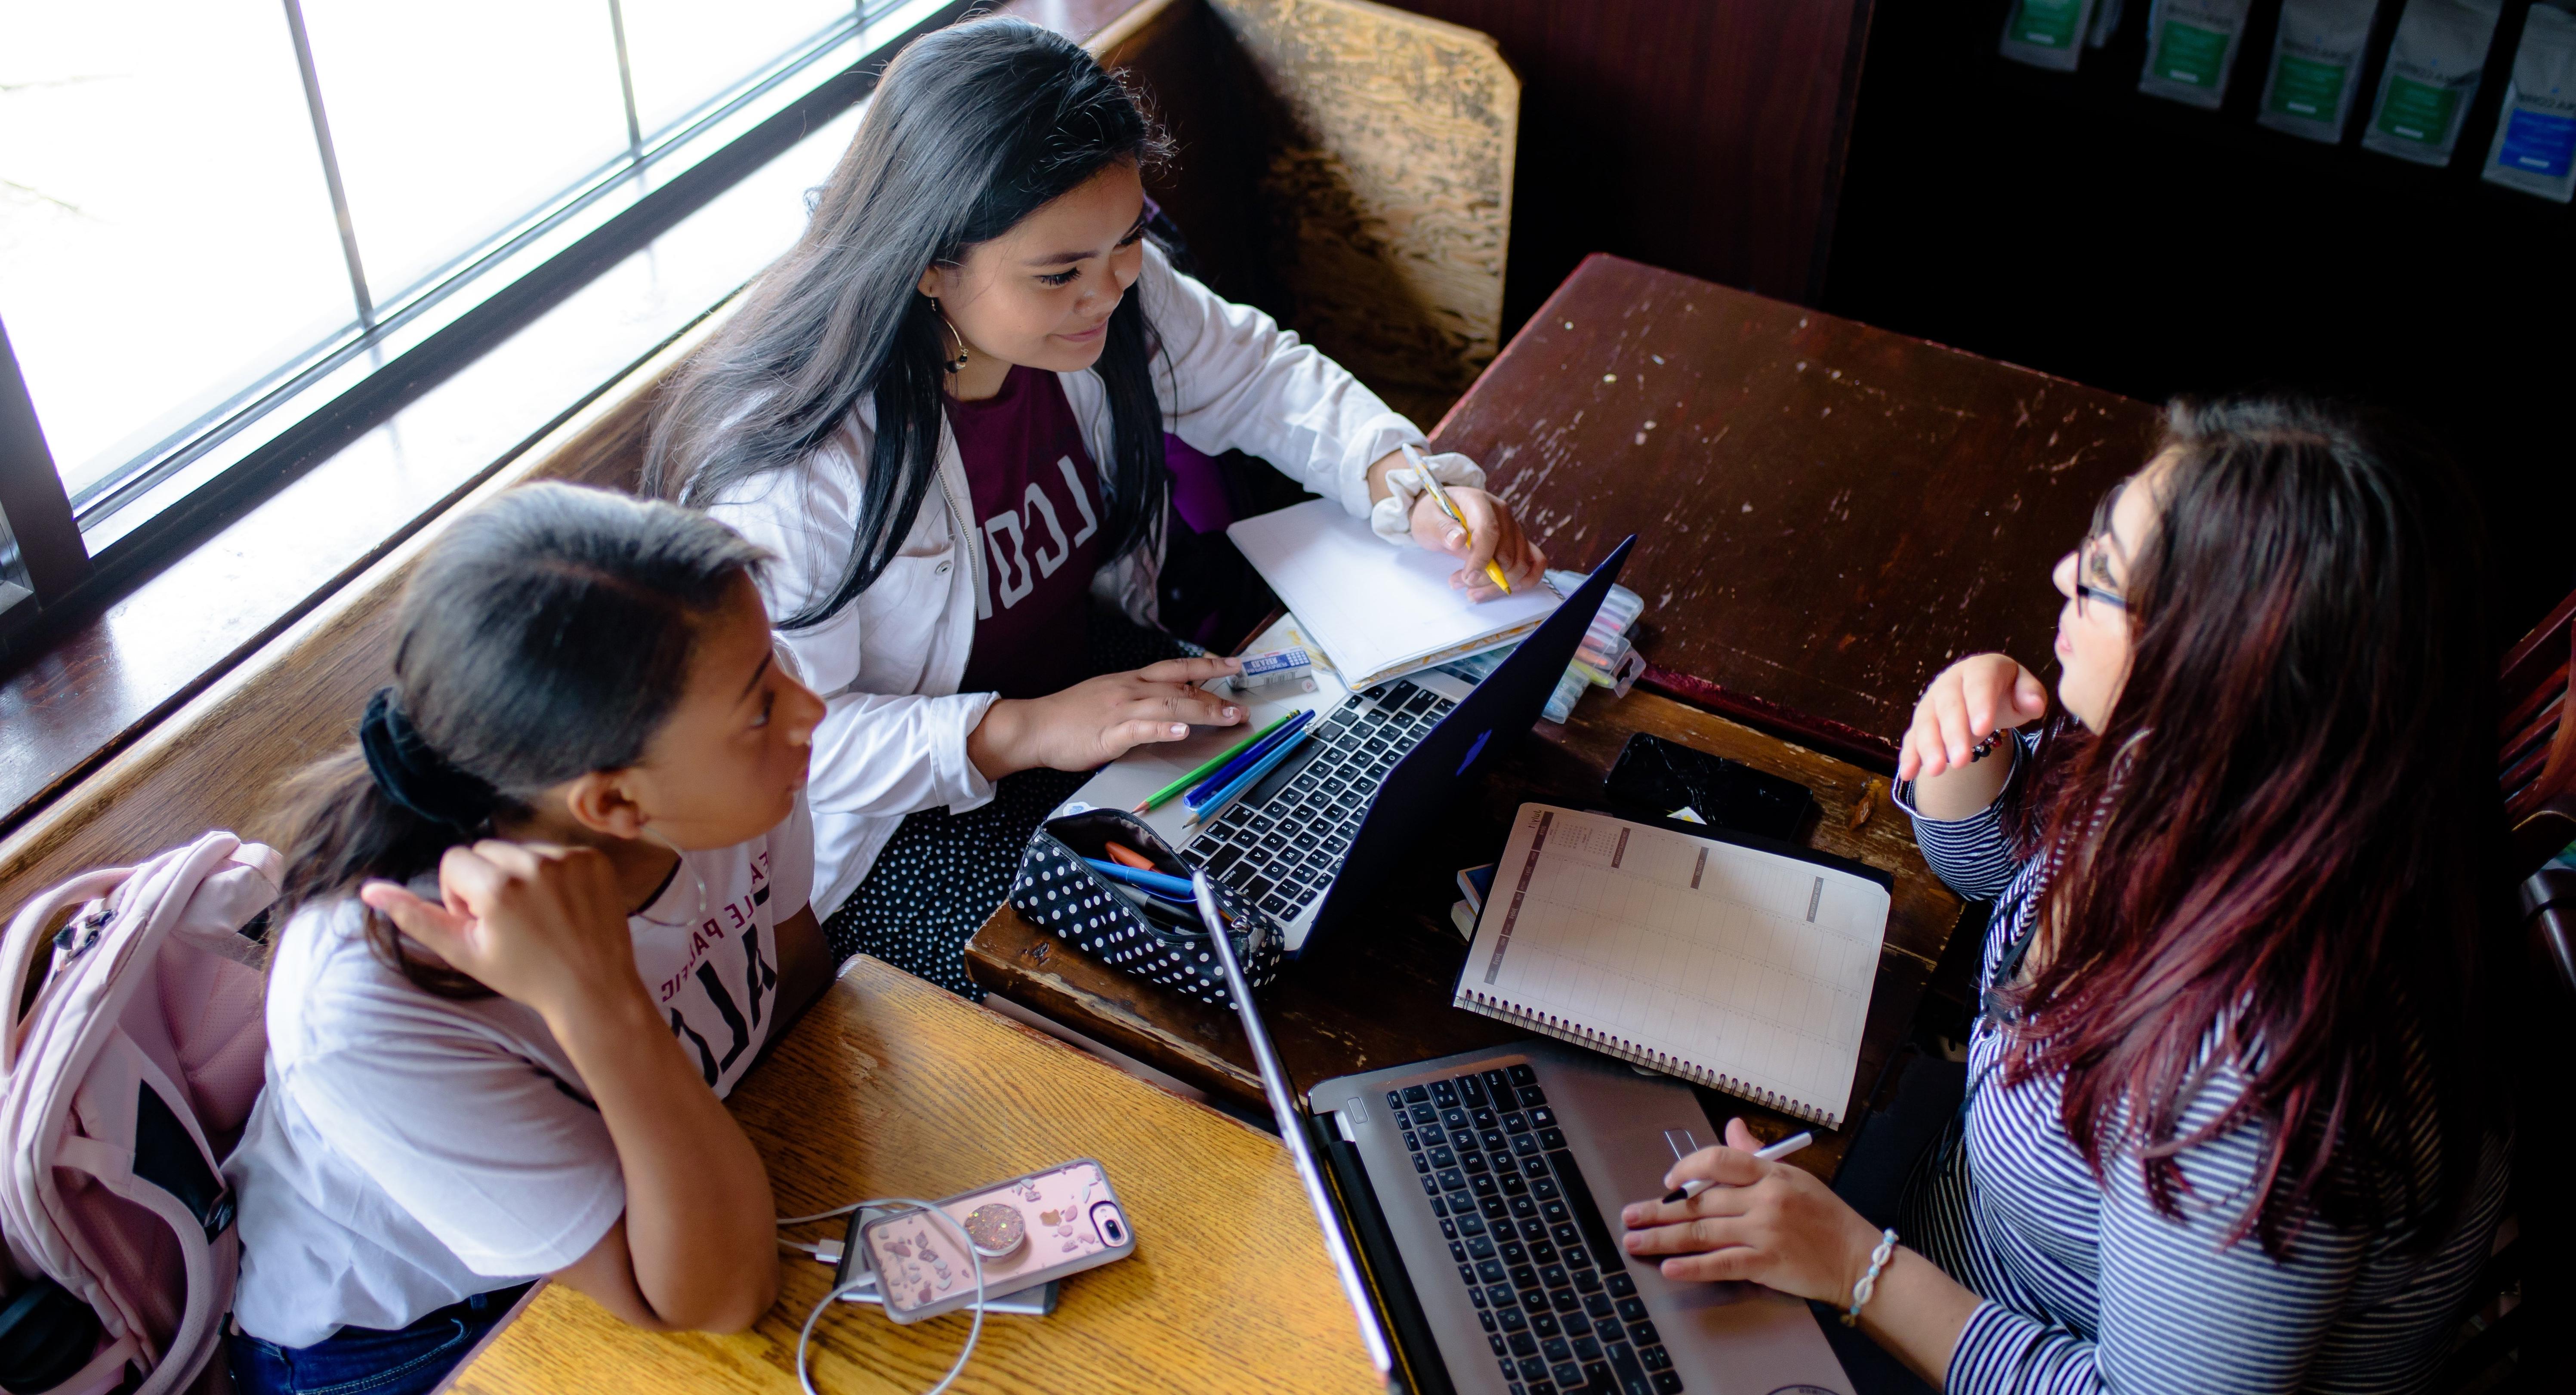 Three students study together at a cafe table